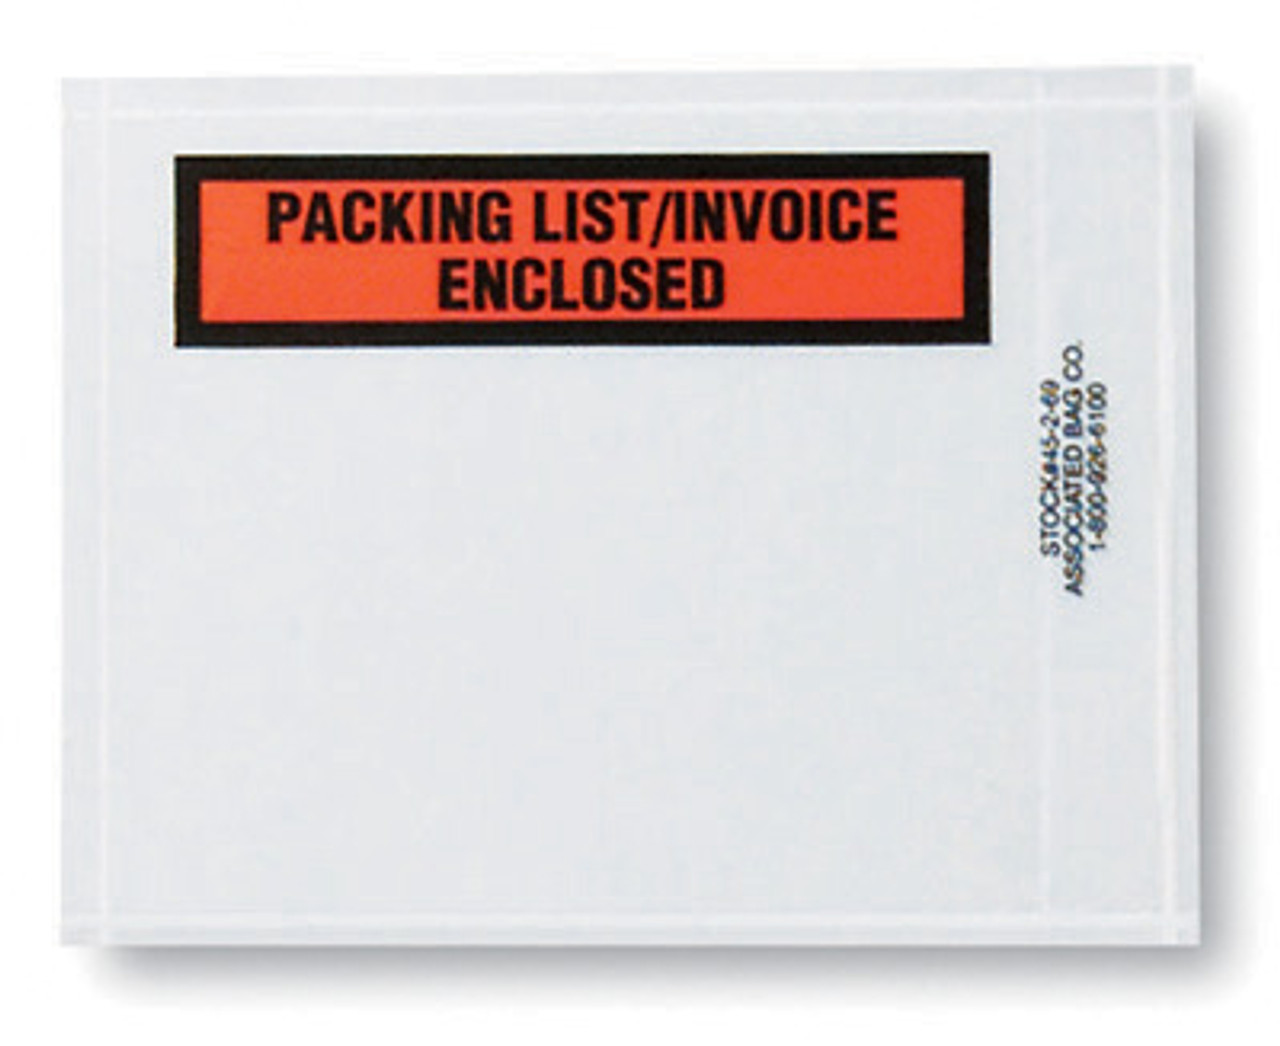 Back-Loading Printed Packing List Envelope - "Packing List/Invoice Enclosed" (Qty) 1000 Items